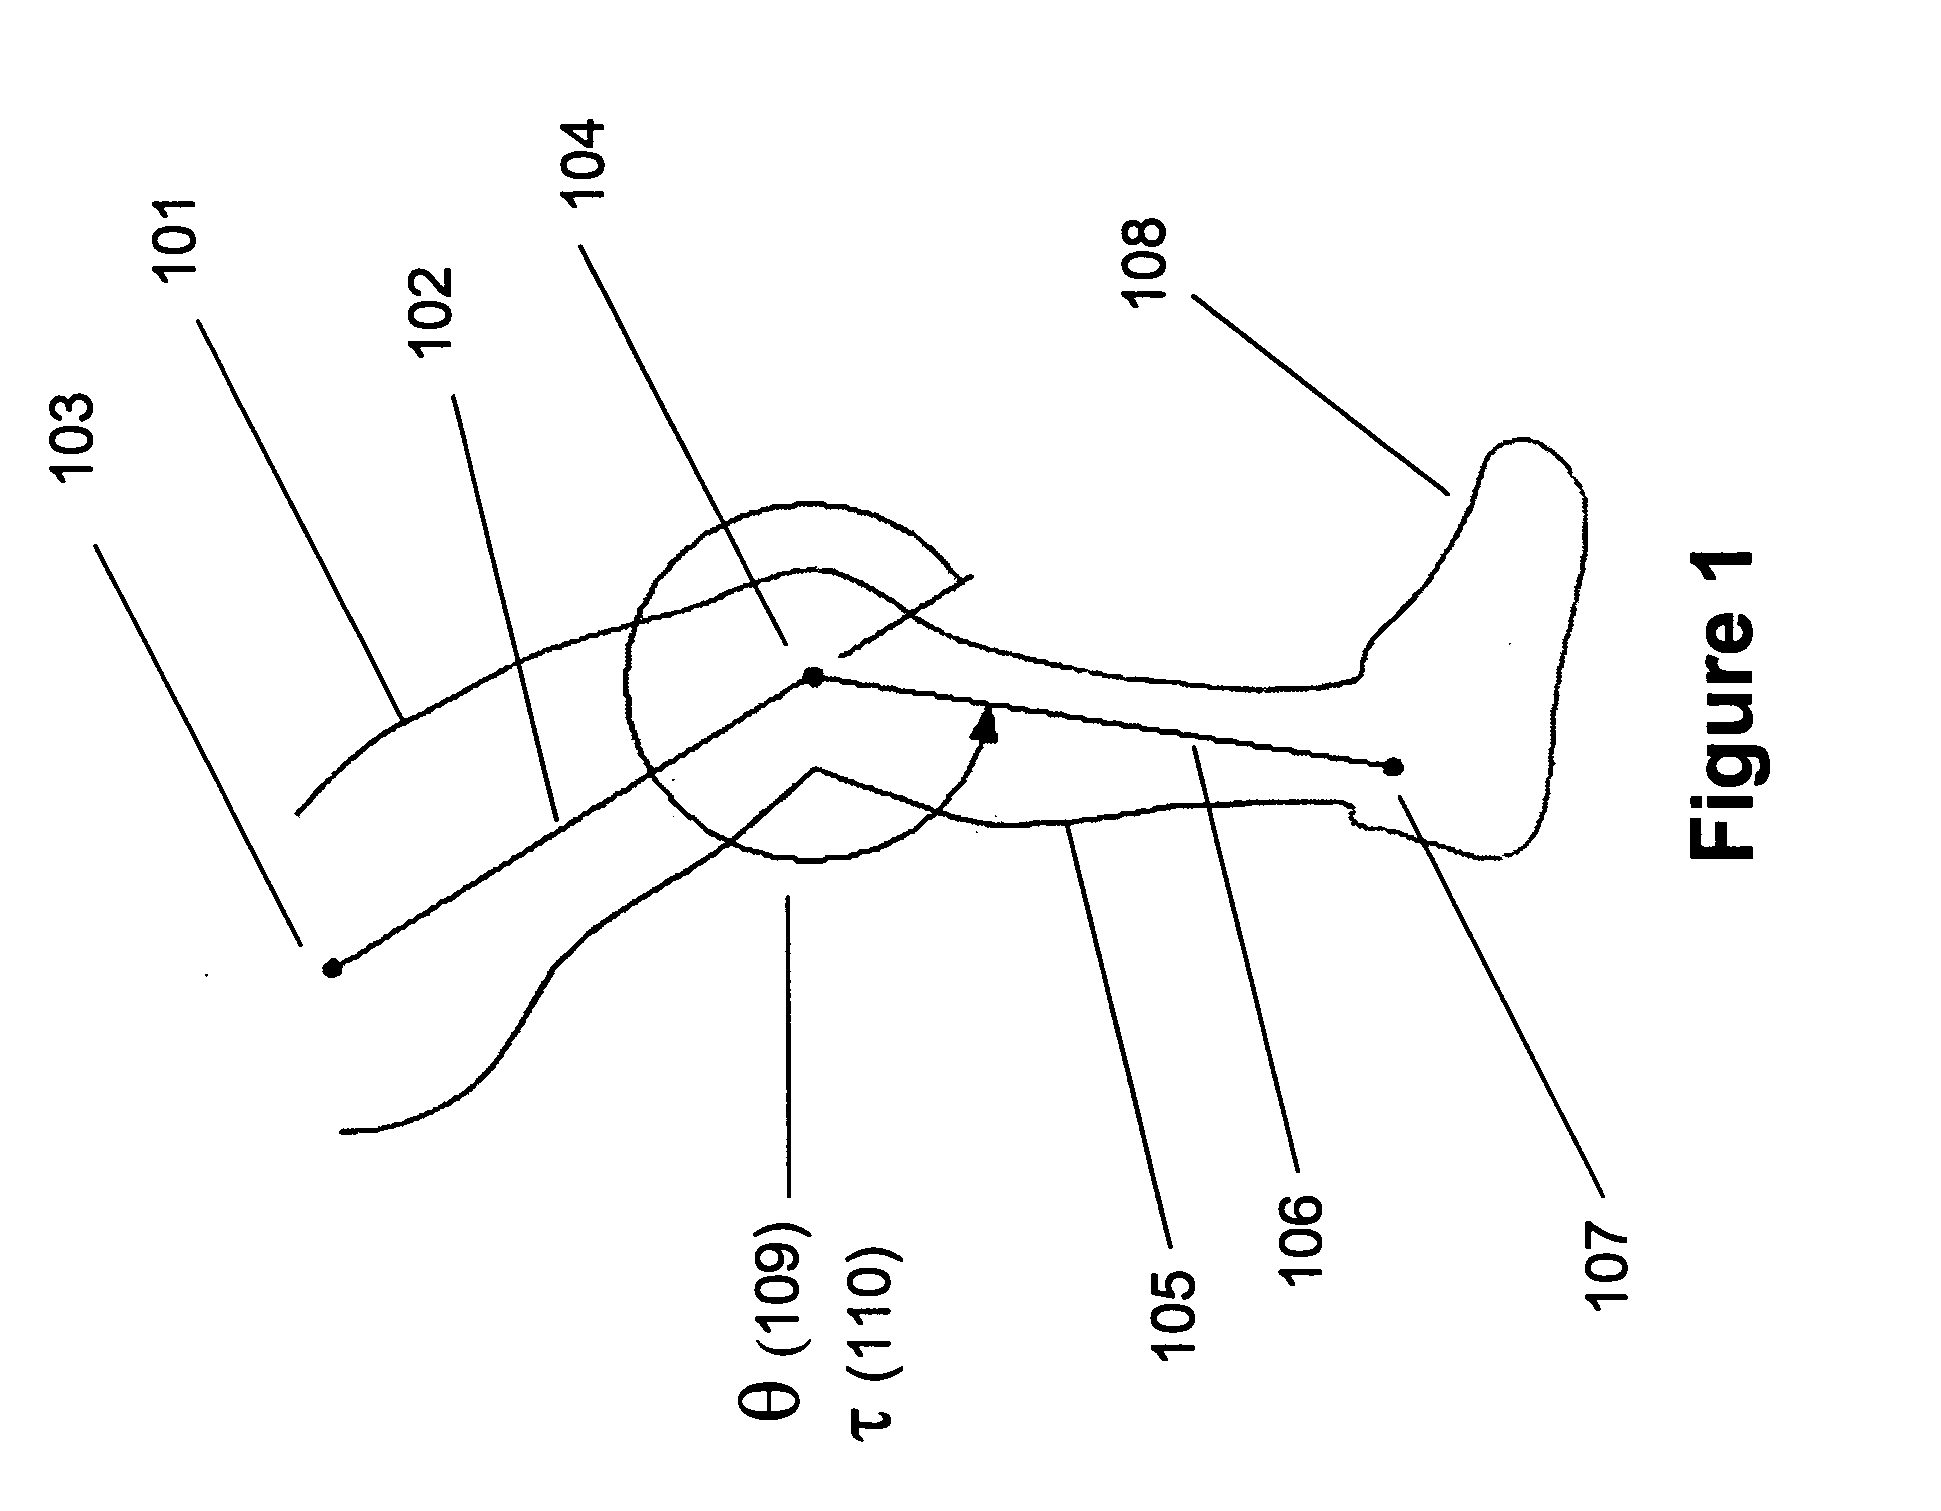 Walk-assist devices and methods